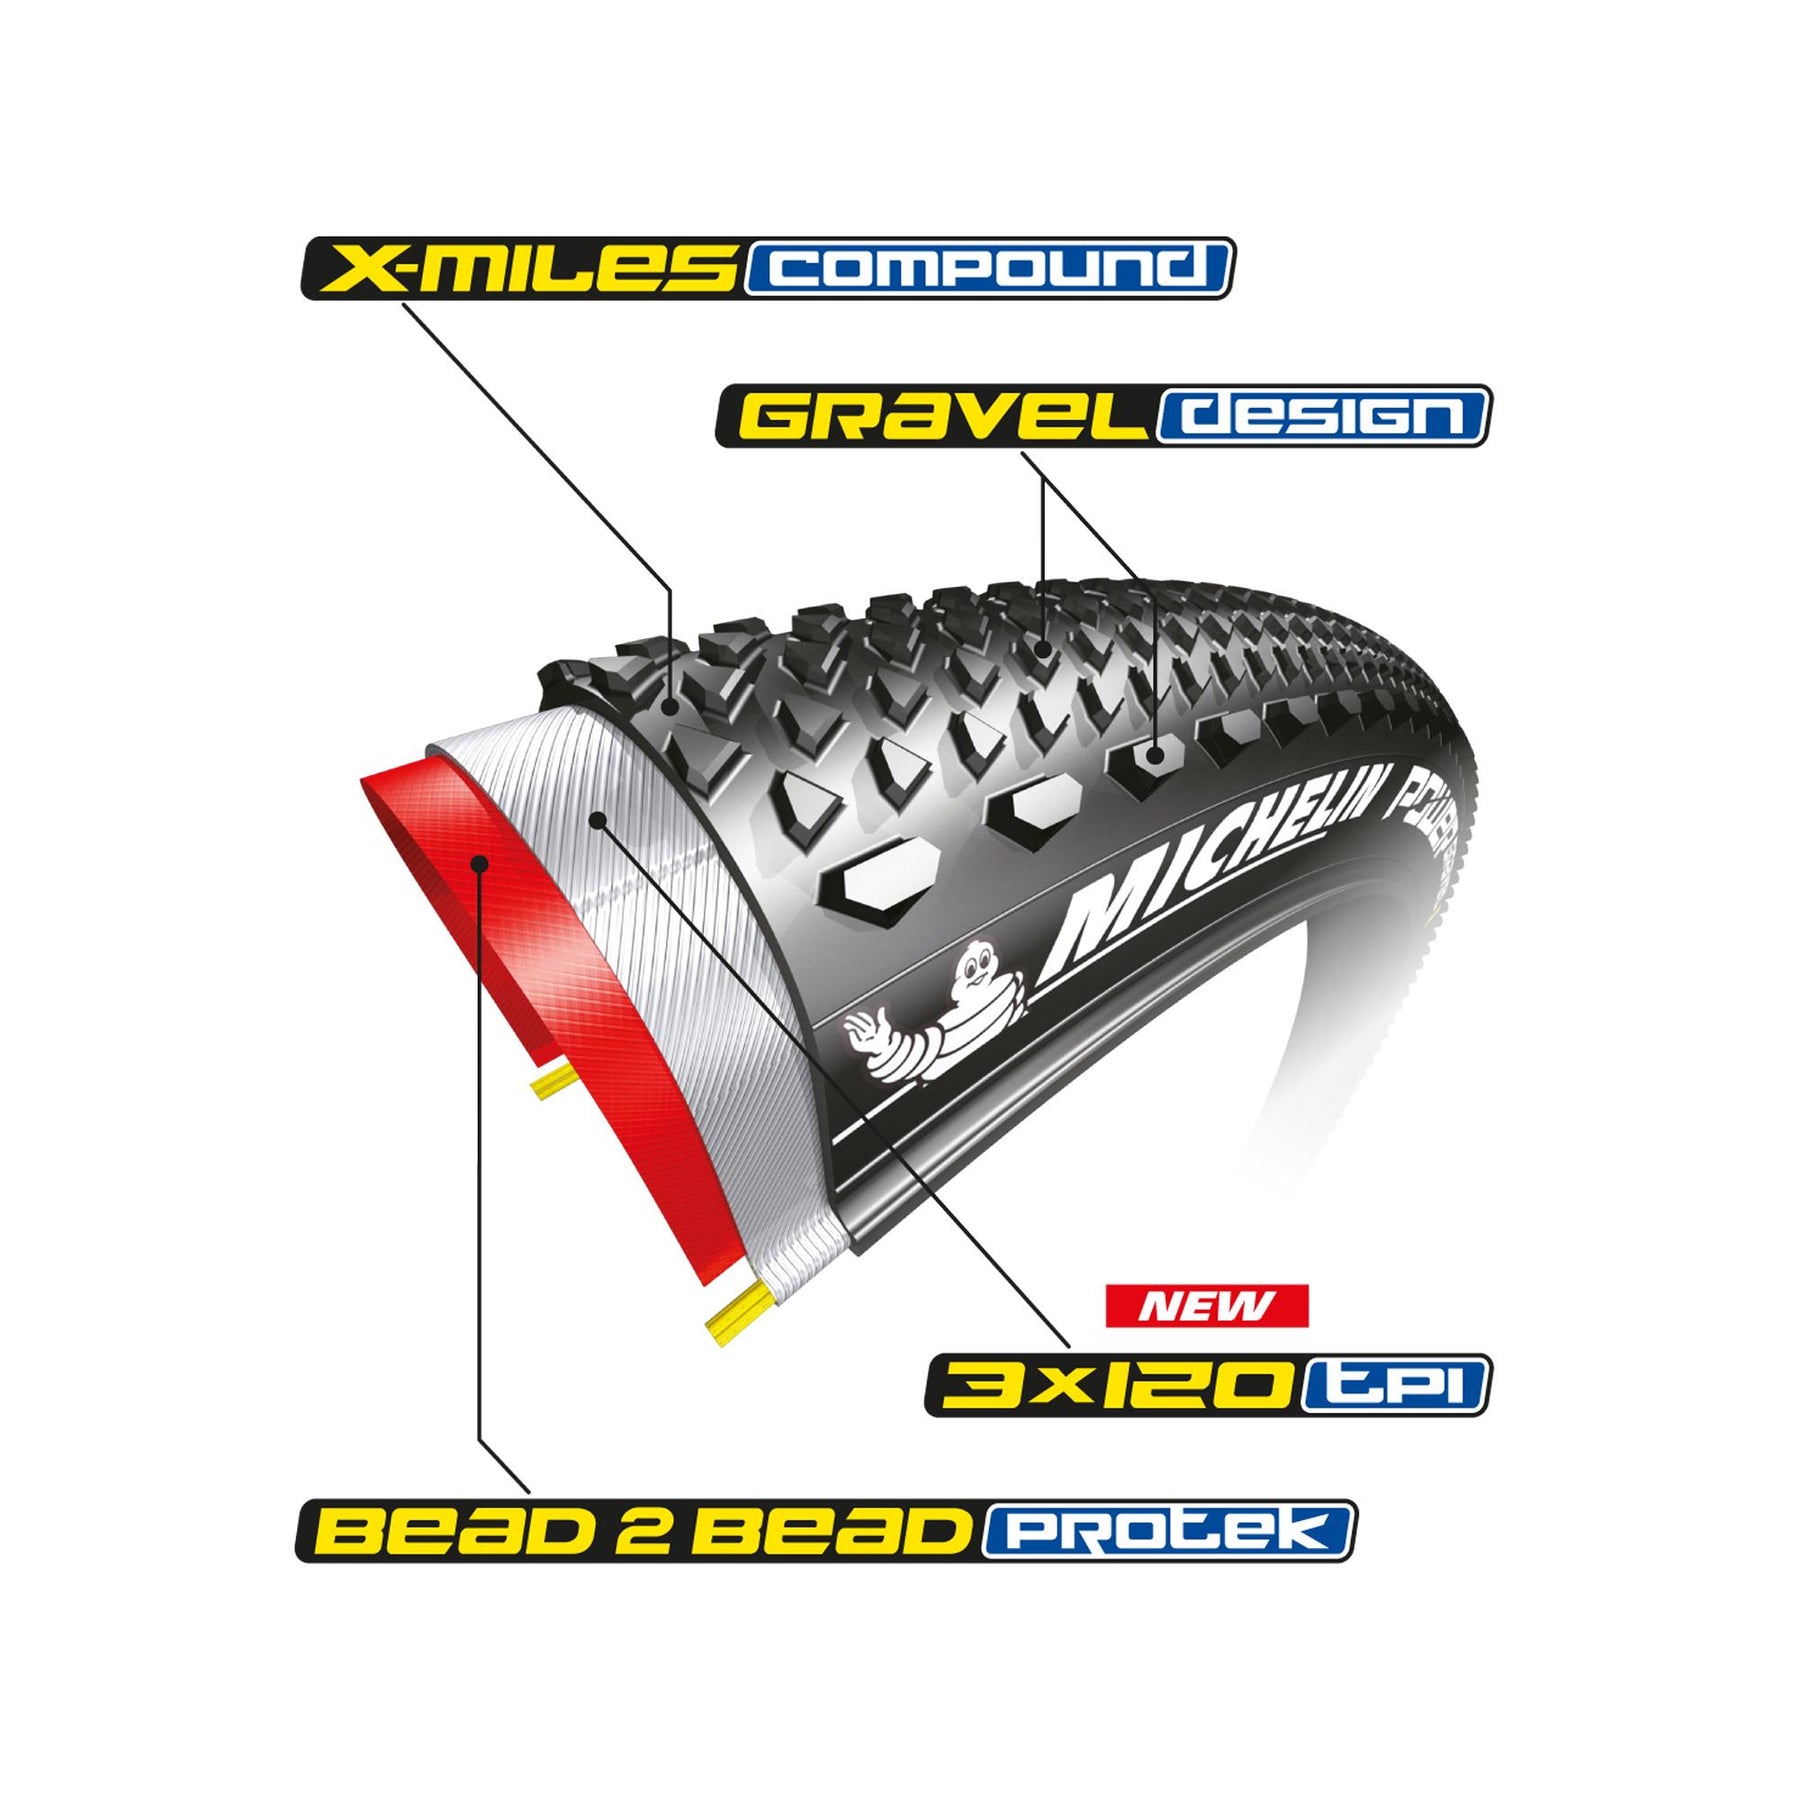 Michelin Power Gravel TLR Tyre